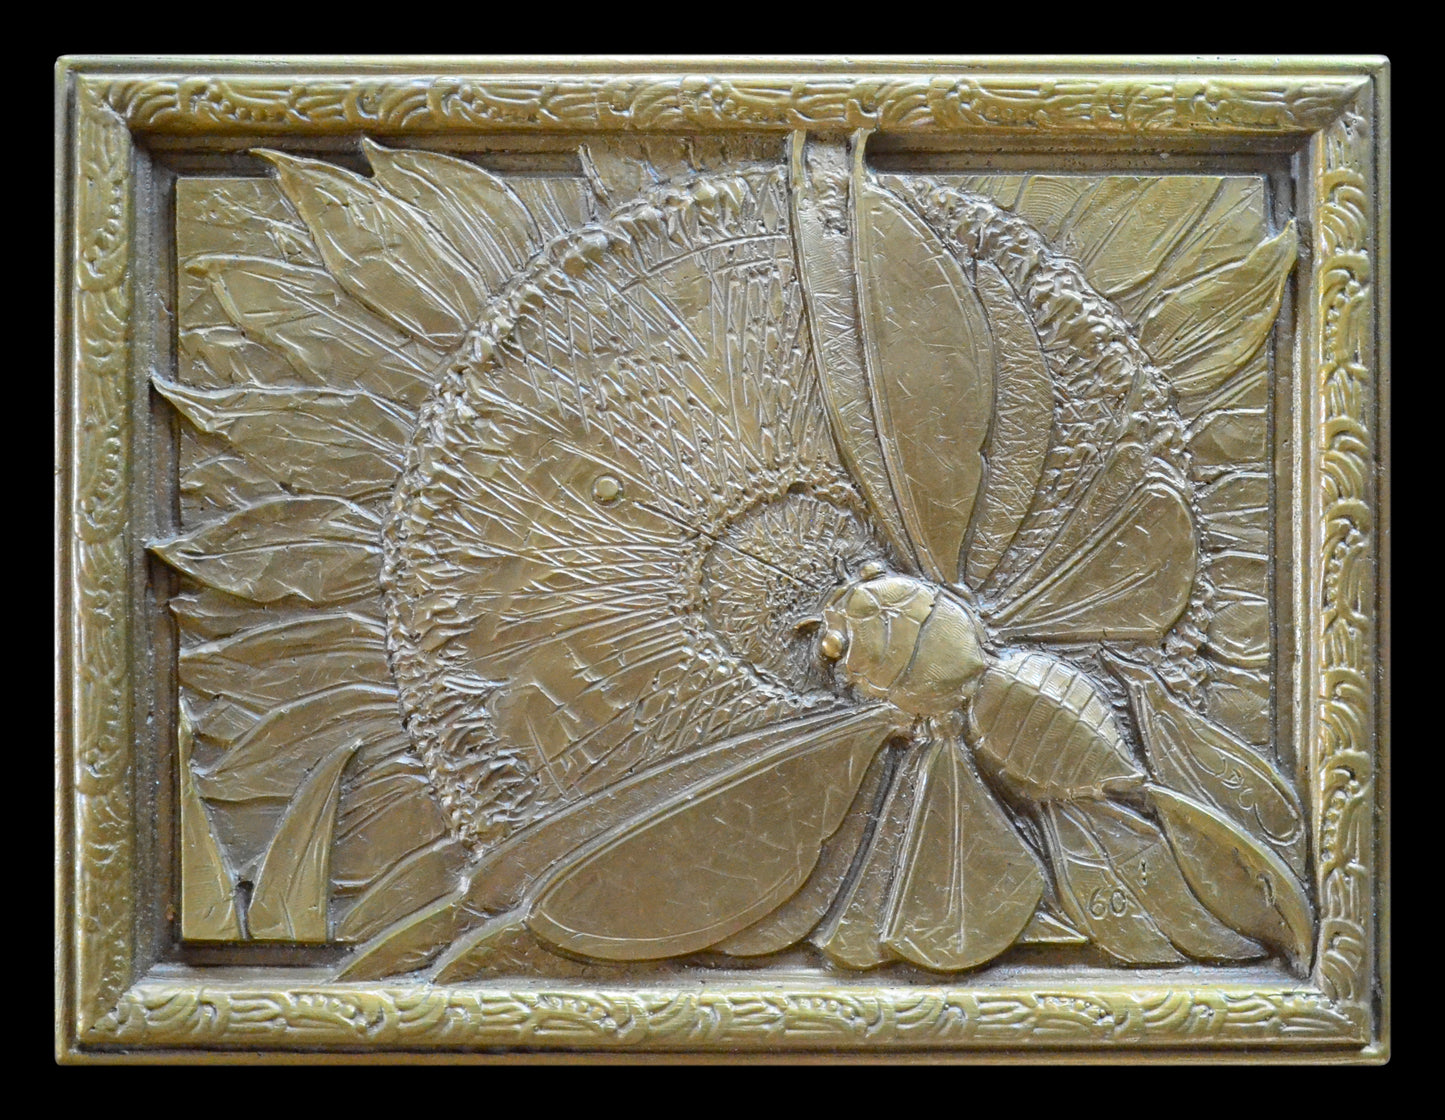 Turning Towards Autumn - Cicada and Sunflower - JD WELSH - low relief bronze - 6" x 8"